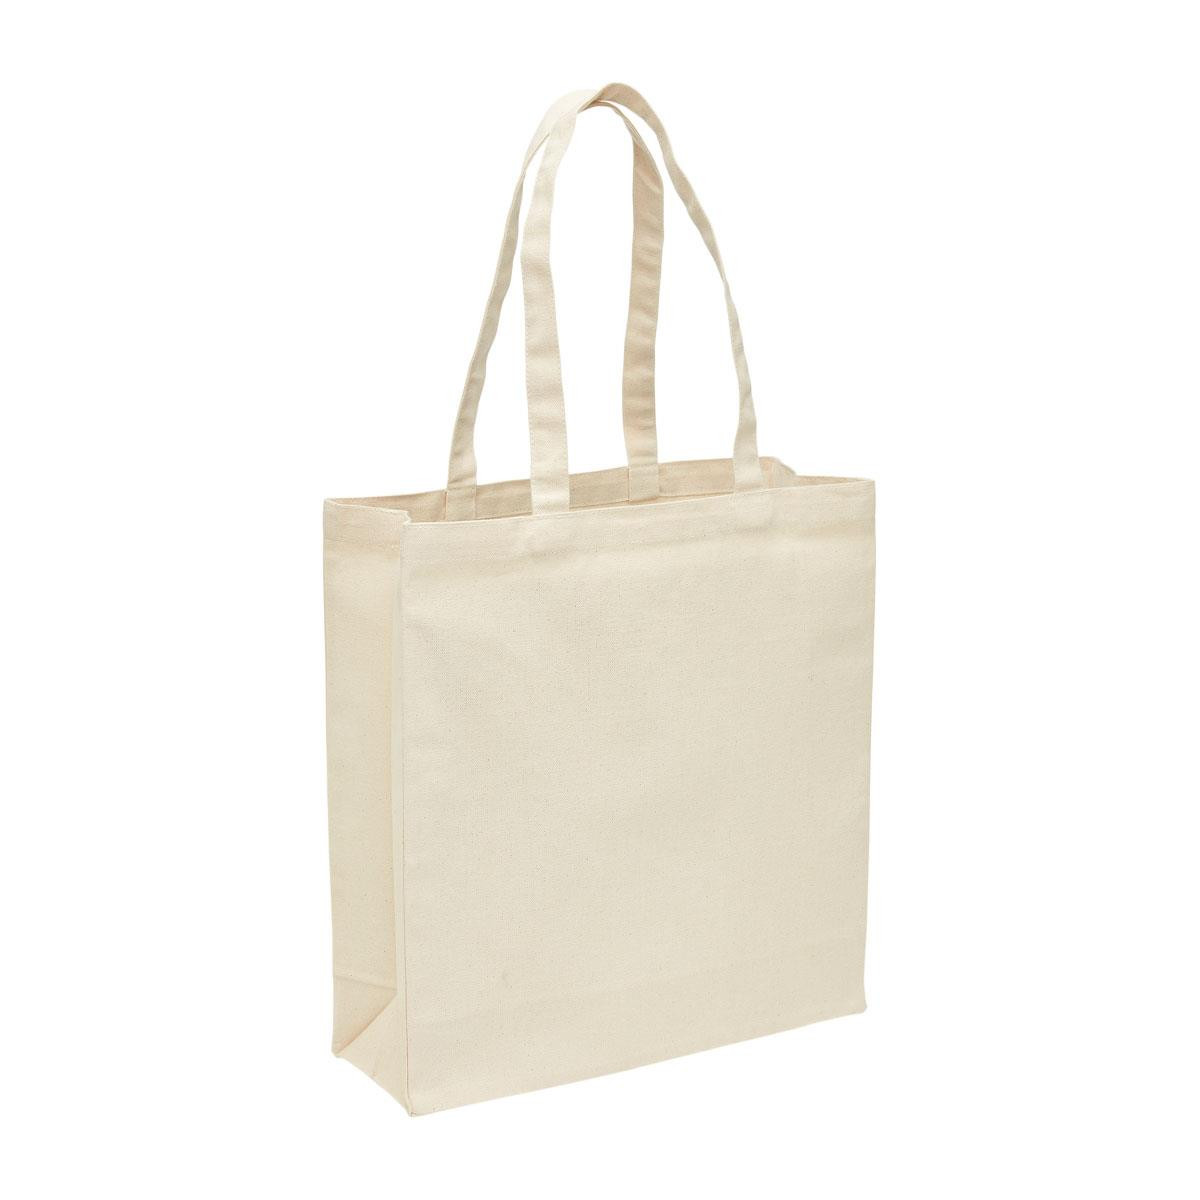 Heavy Duty Canvas Tote Bags | IUCN Water